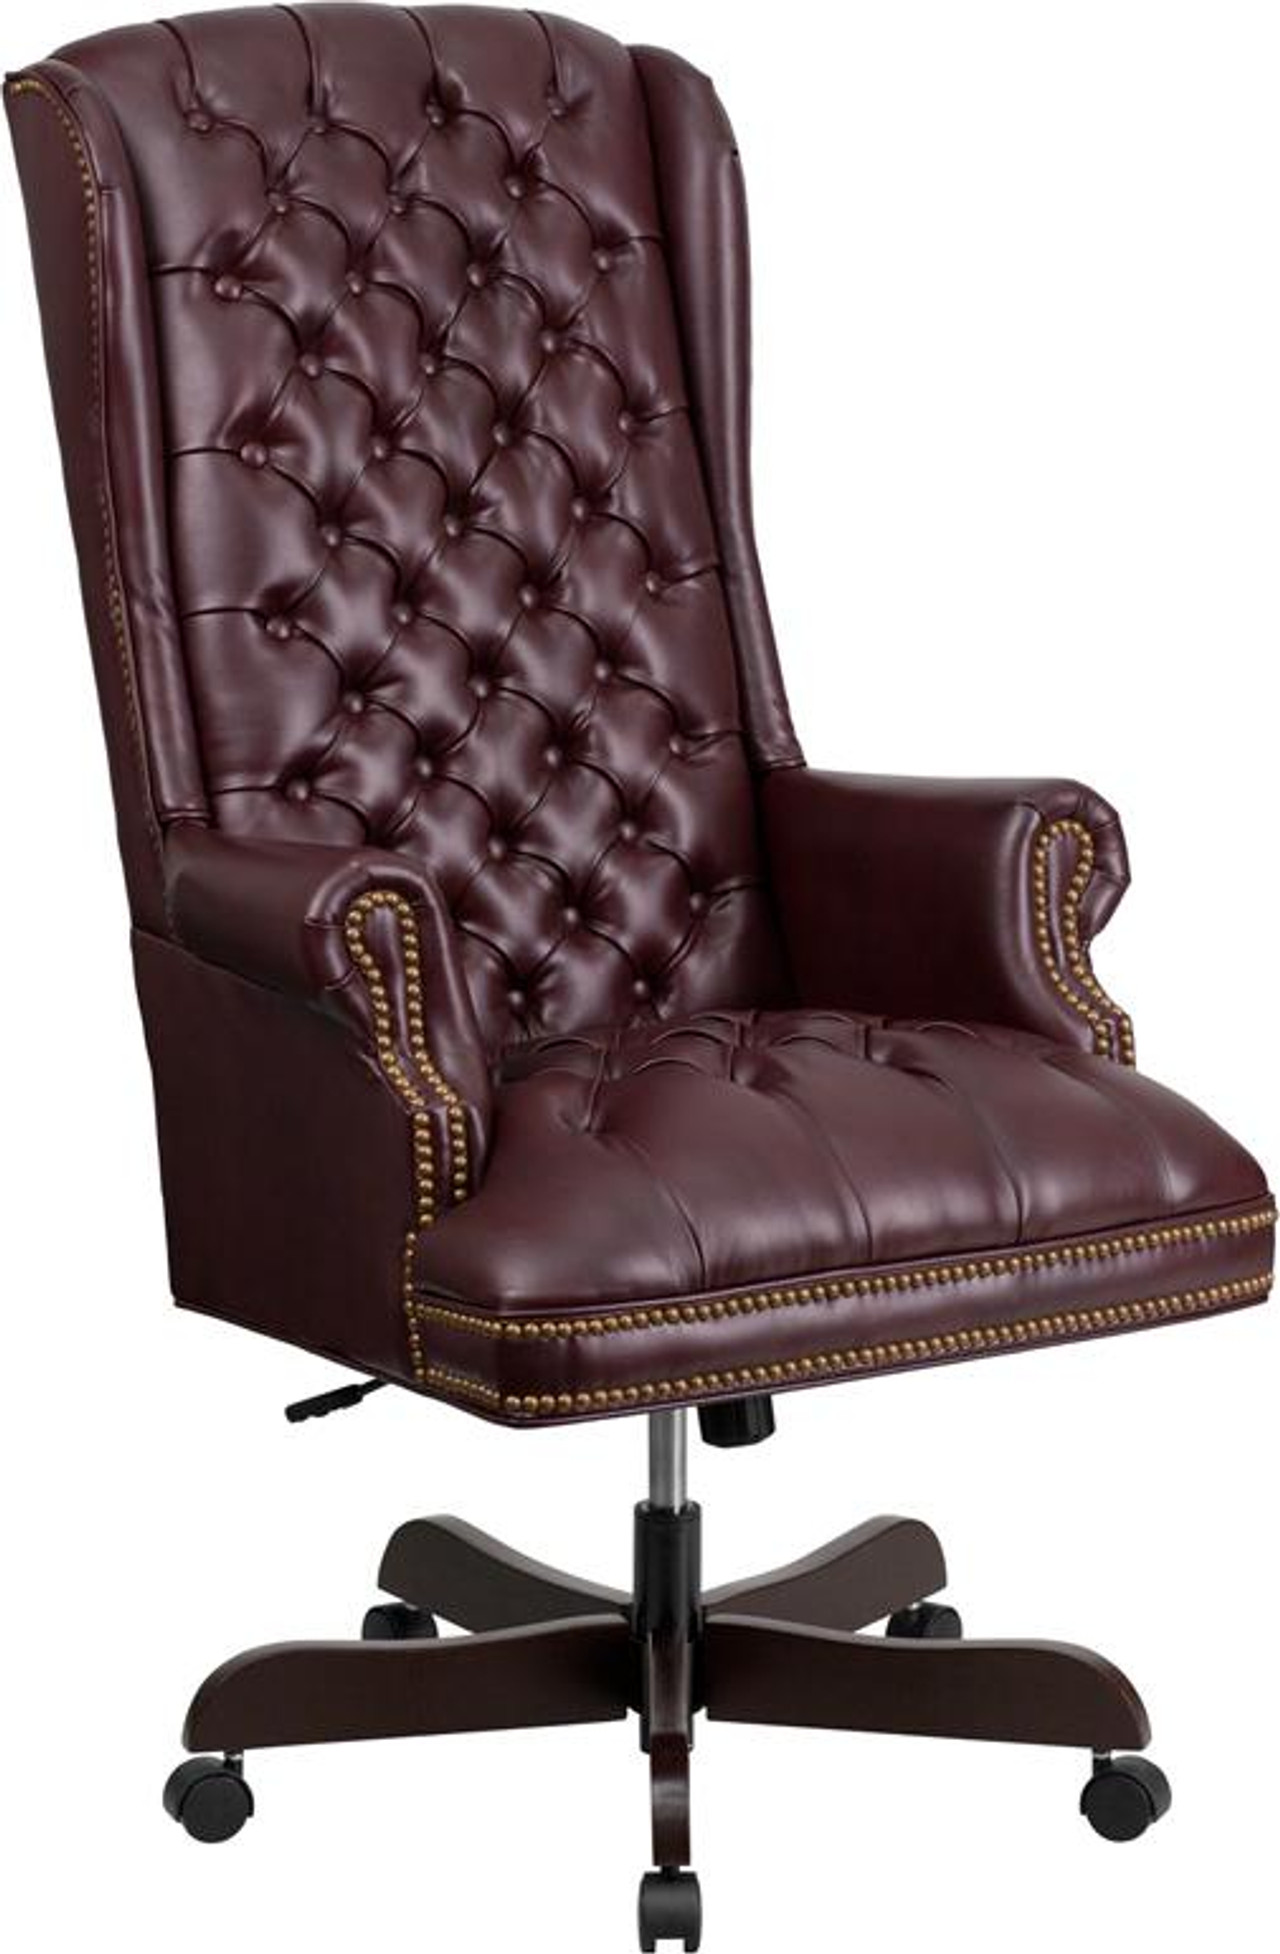 Flash Furniture Ci 360 By Gg High Back Traditional Tufted Burgundy Leather Executive Office Chair 1  04371.1589832154 ?c=1